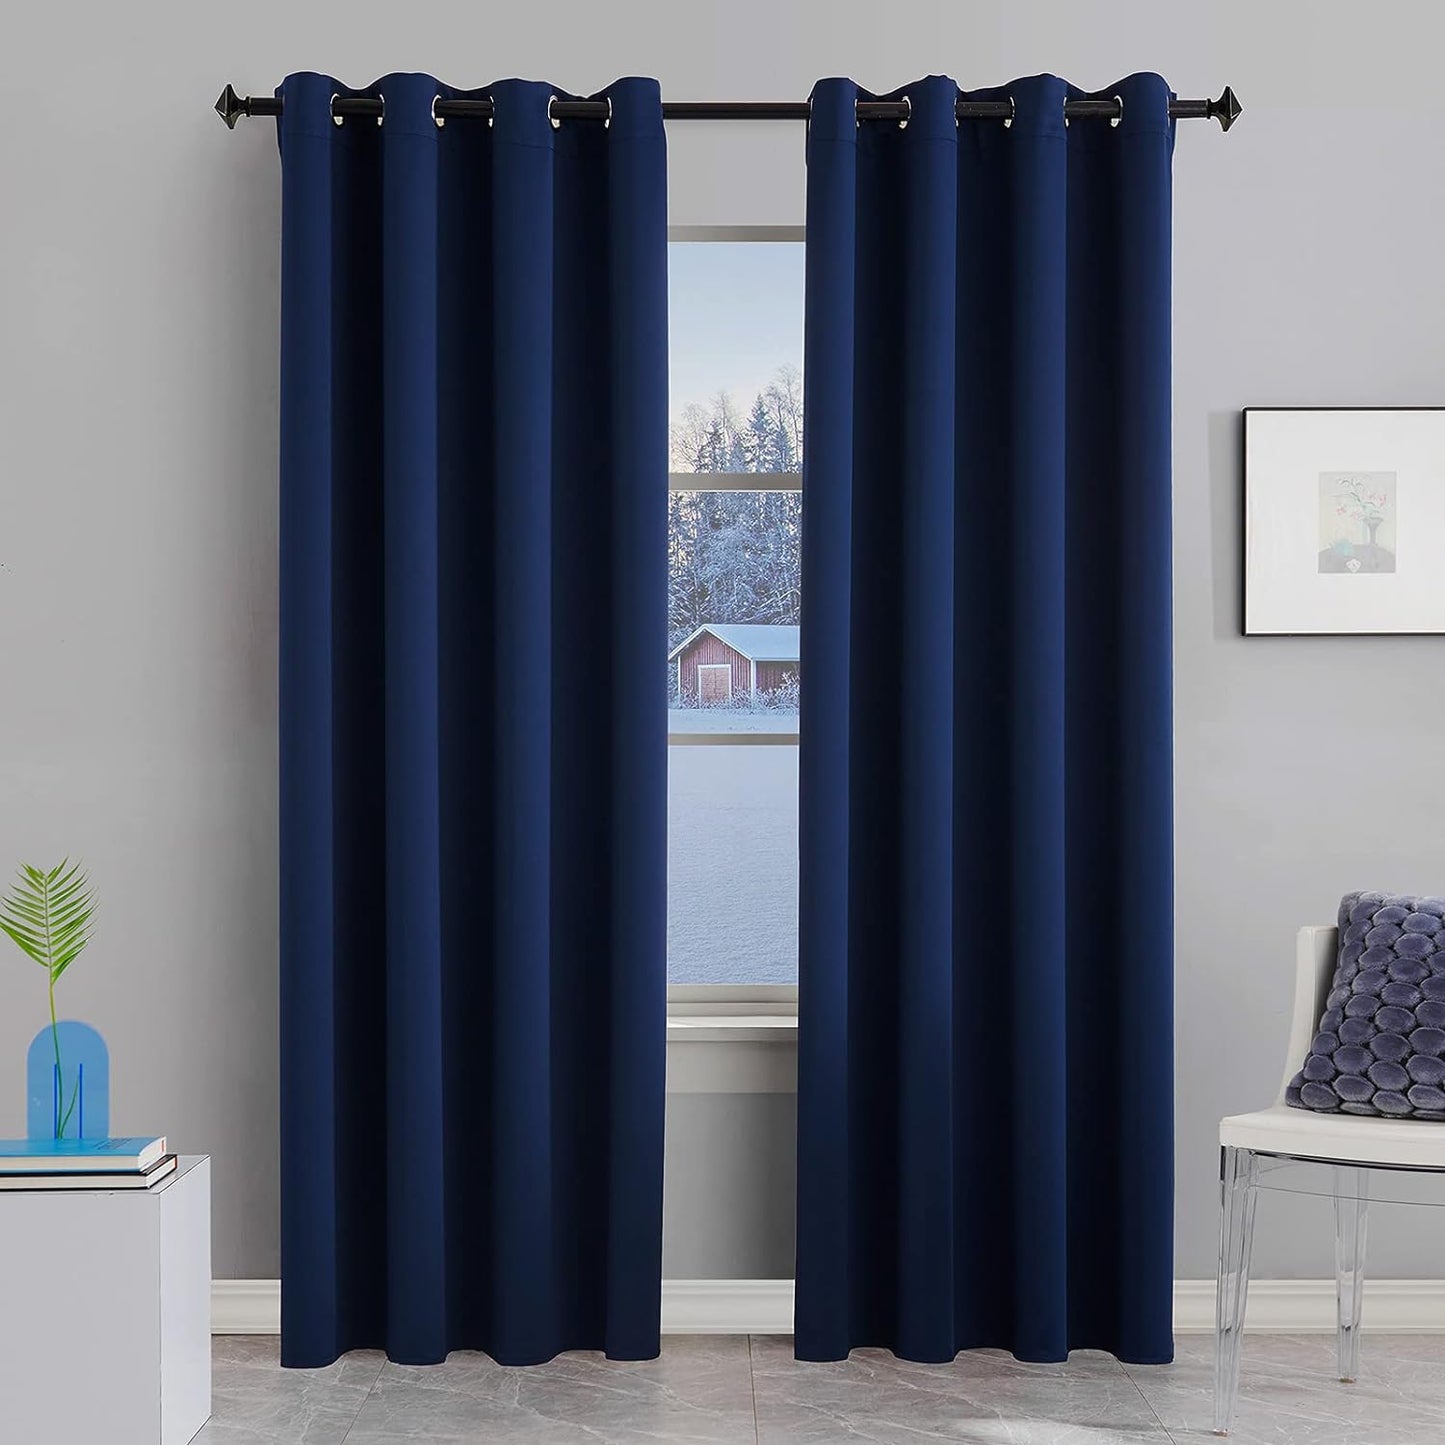 BERSWAY 99% Blackout Curtains & Drapes Panels 84 Inches Darkening Curtains - Thermal Insulated Curtain for Bedroom-Red 84 Inches Long Grommet Window Curtain 2 Panels Set,W 52" X L 84"  BERSWAY Blue 52"Wx63"L 